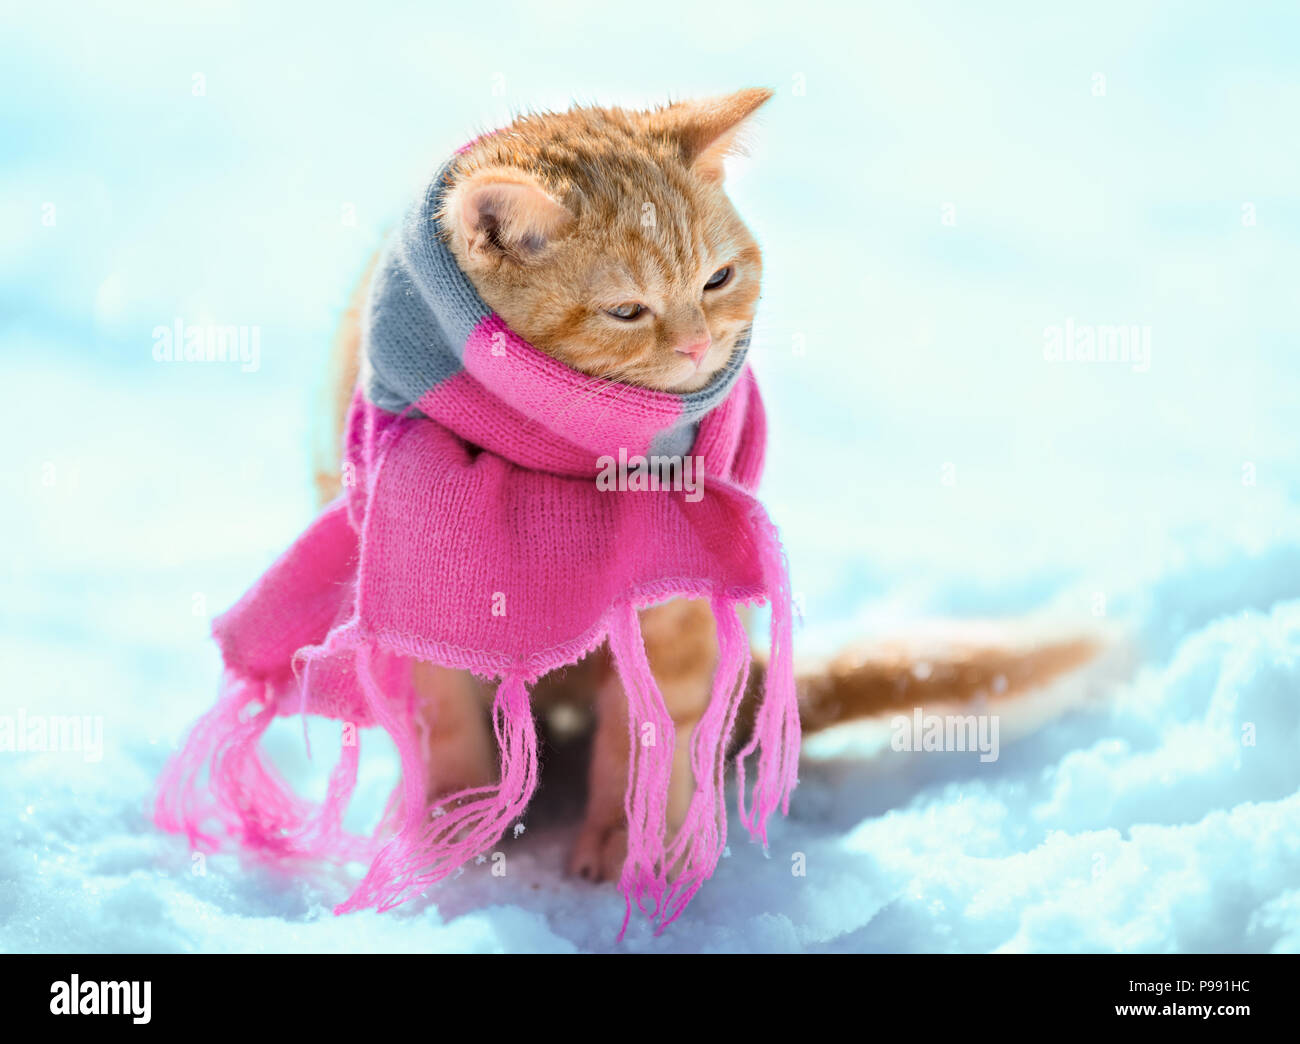 Portrait of the little red kitten wearing knitted scarf outdoors in winter Stock Photo